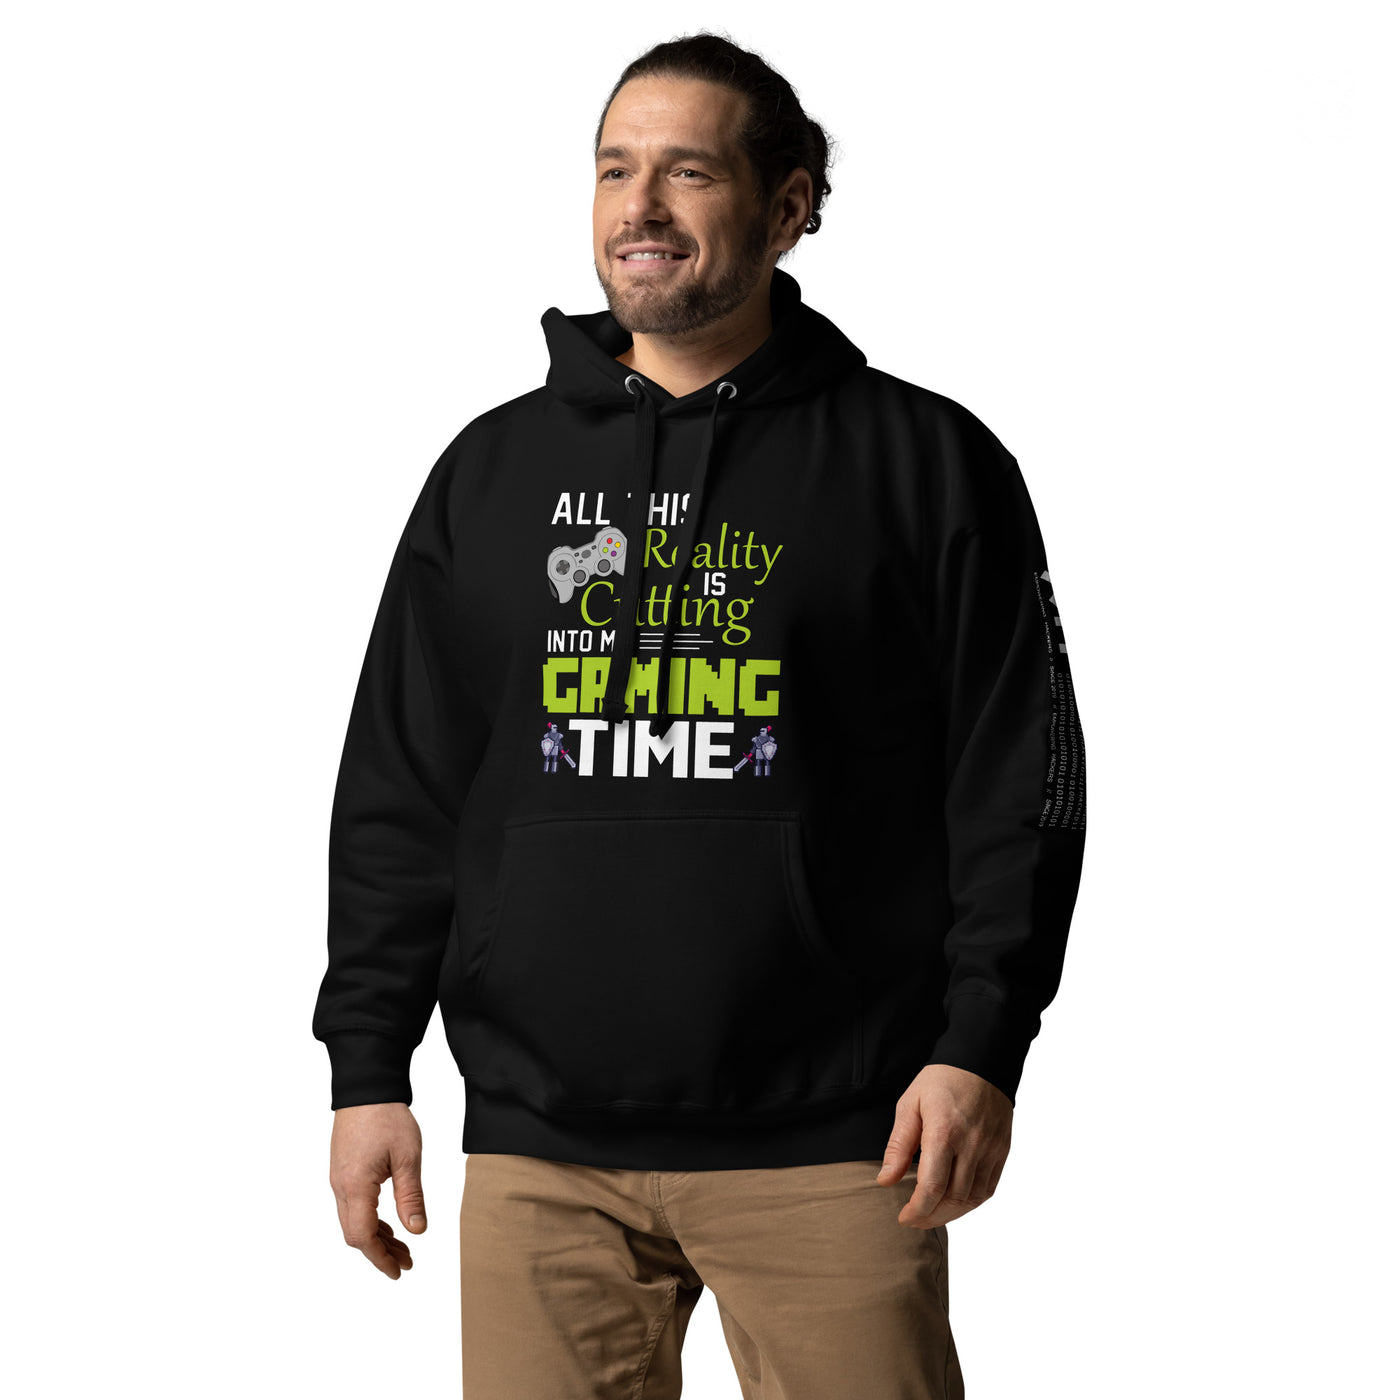 All this reality is cutting my Gaming Time - Unisex Hoodie